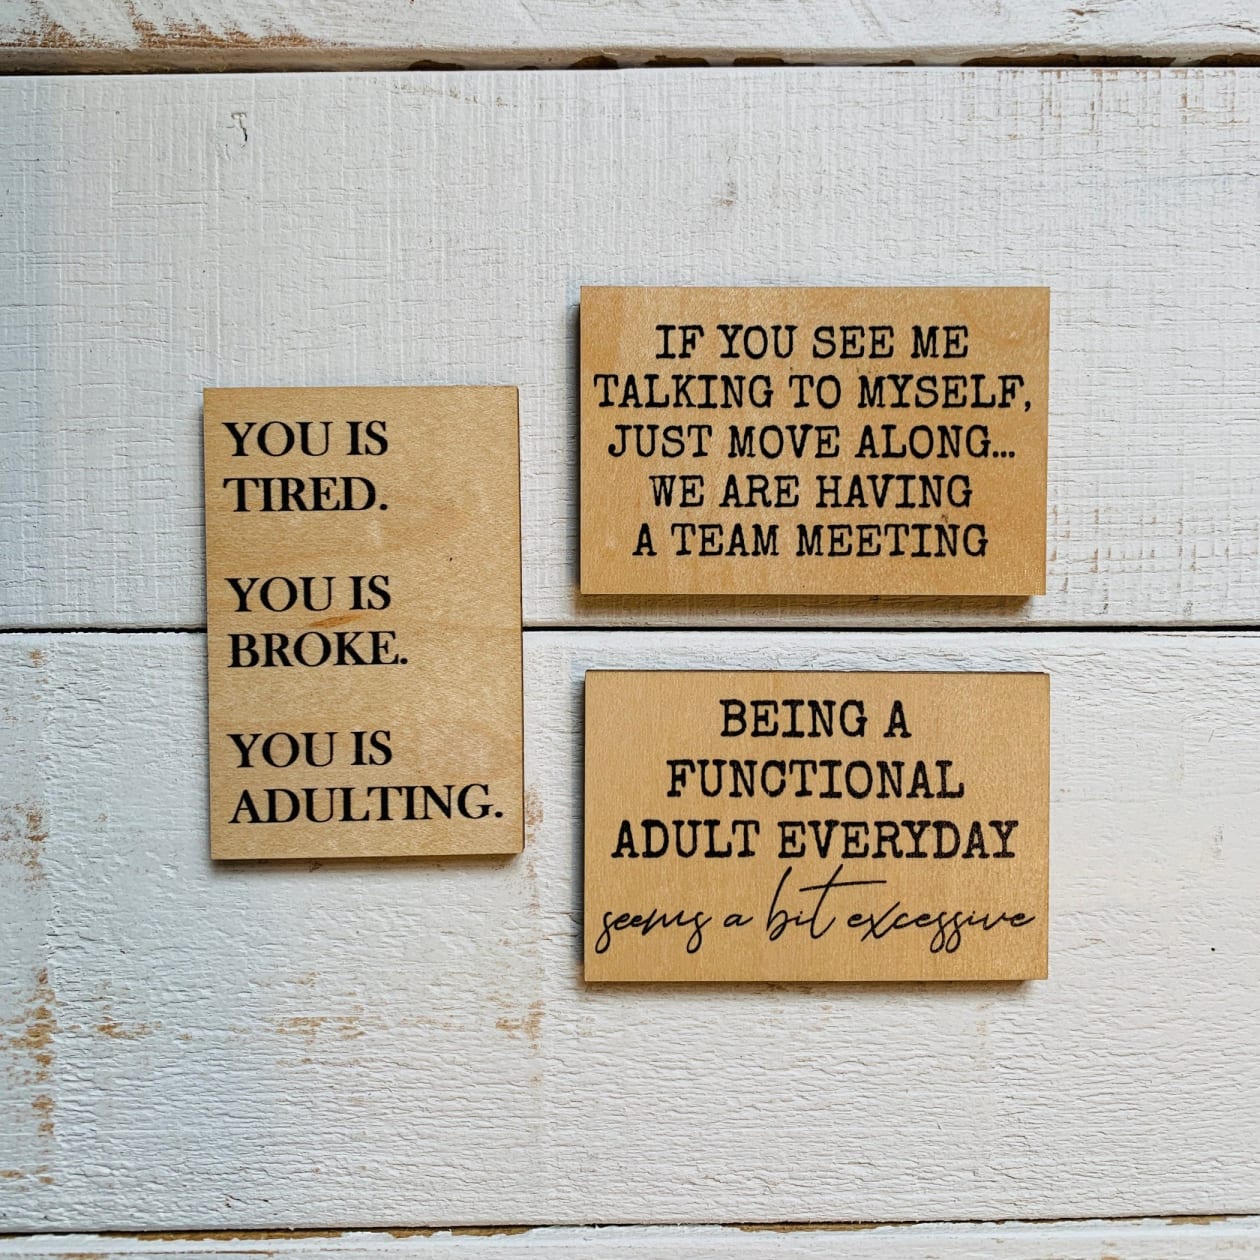 If You See Me Talking to Myself, I’m Having a Team Meeting Funny Wood Refrigerator Magnet | 2" x 3"